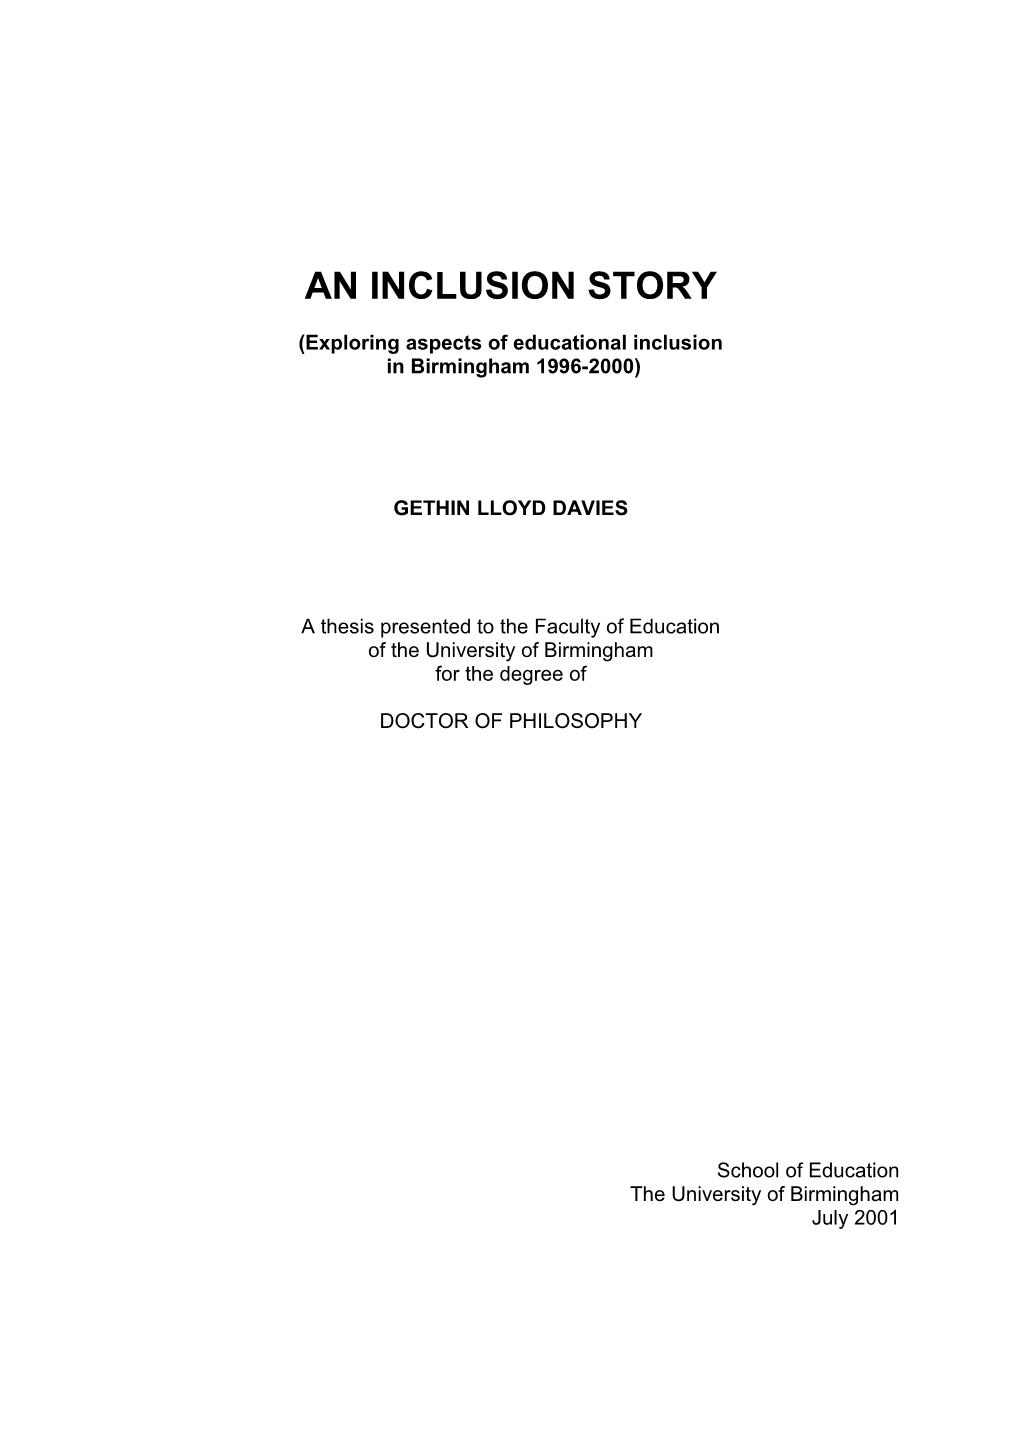 An Inclusion Story